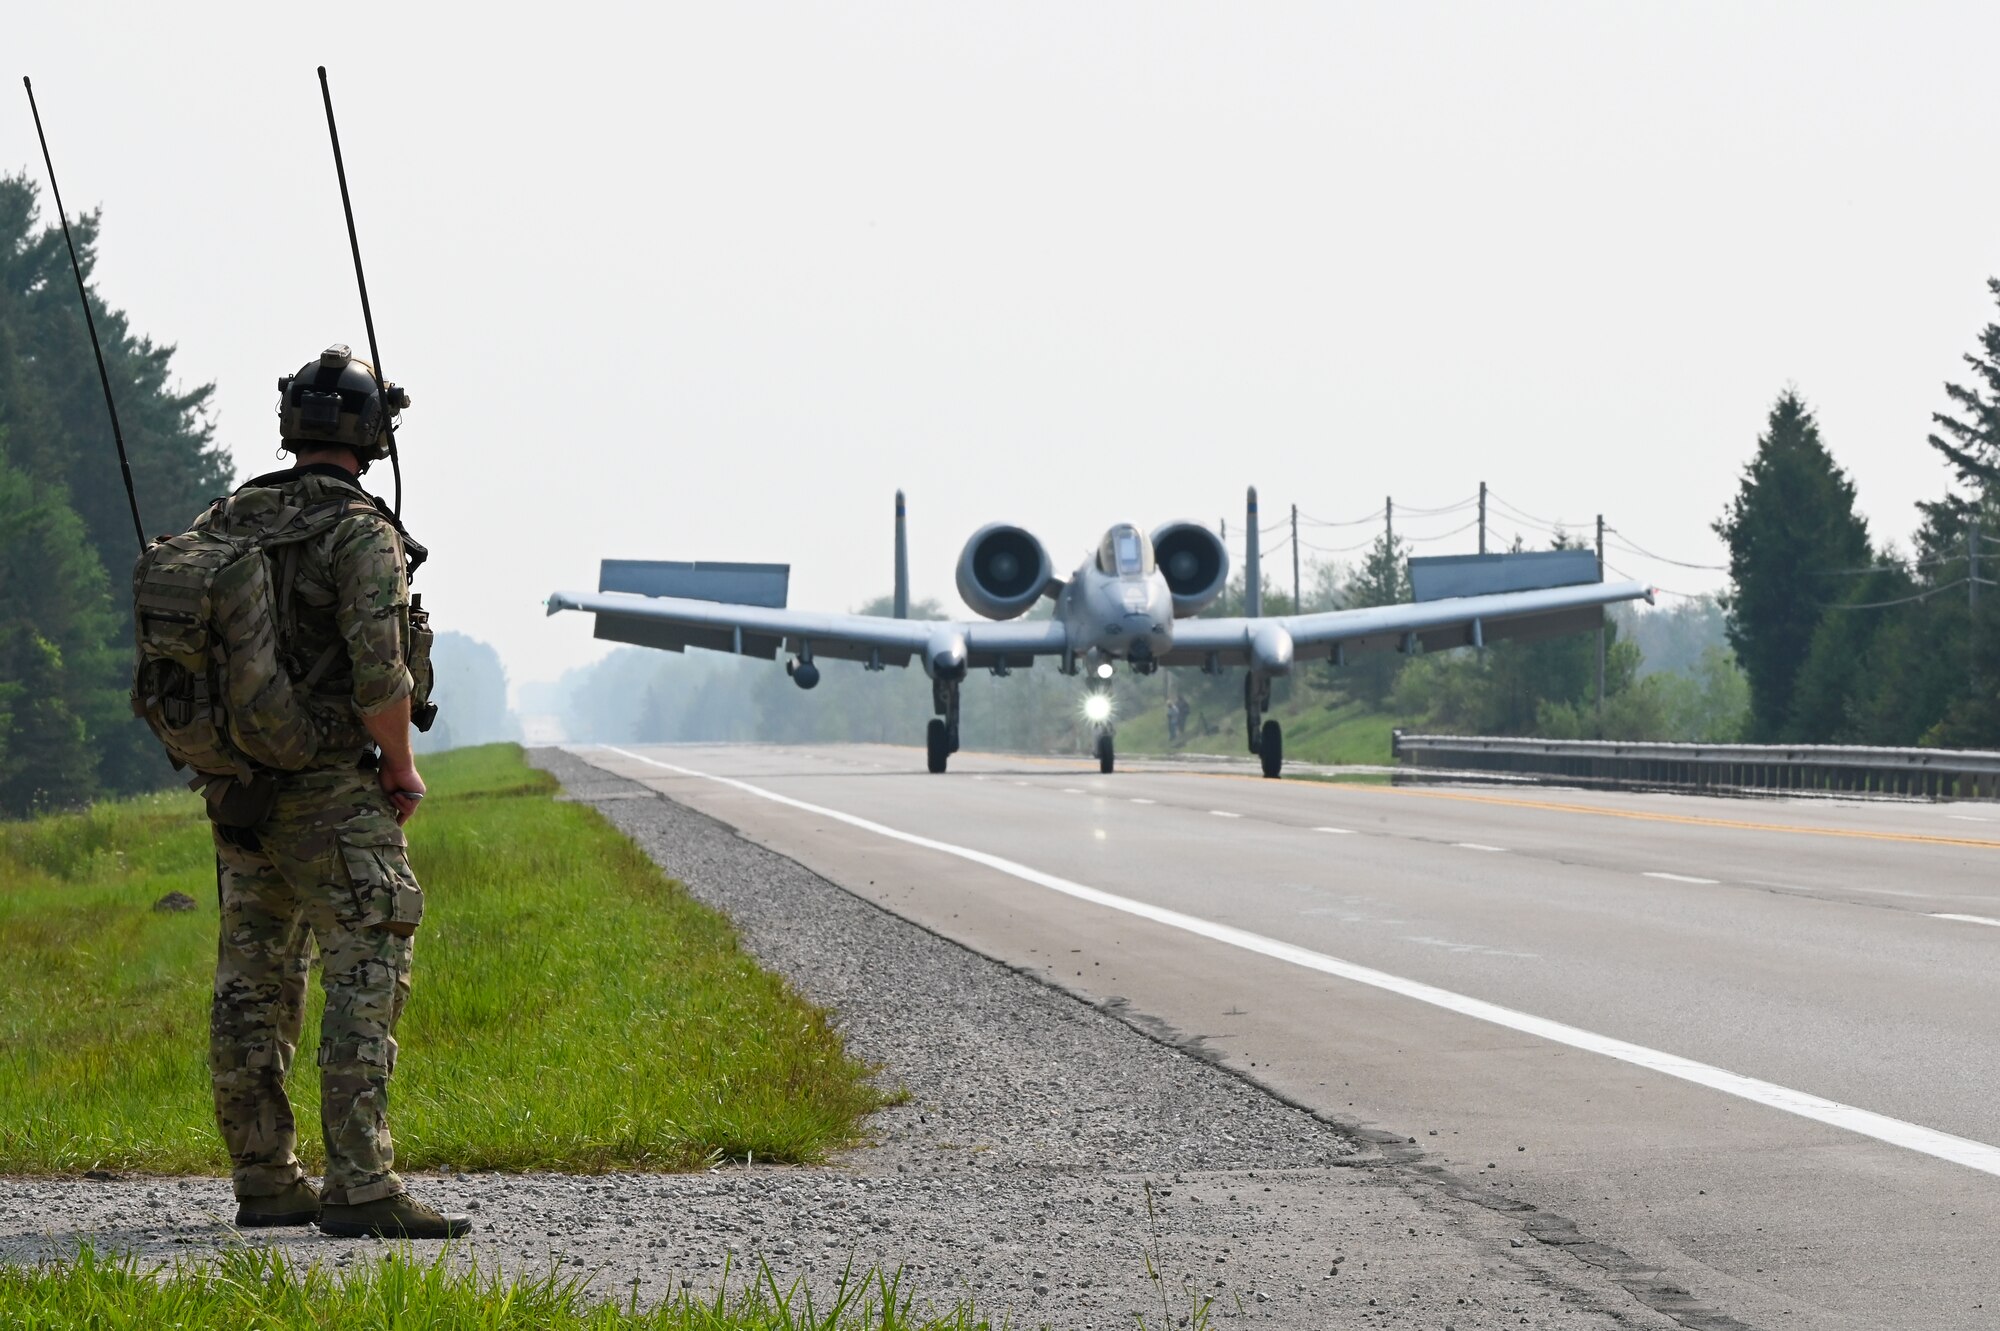 A U.S. Air Force 127th Wing A-10 Thunderbolt II, with ground air traffic control and guidance provided by Special Tactics operators from the 24th Special Operations Wing, lands on a closed public highway Aug. 5, 2021 at Alpena, Mich., for the first time ever as part of a training exercise during Northern Strike 21. The joint training event tested part of the agile employment concept, focusing on projecting combat power from austere locations. (U.S. Air Force photo by Staff Sgt. Ridge Shan)